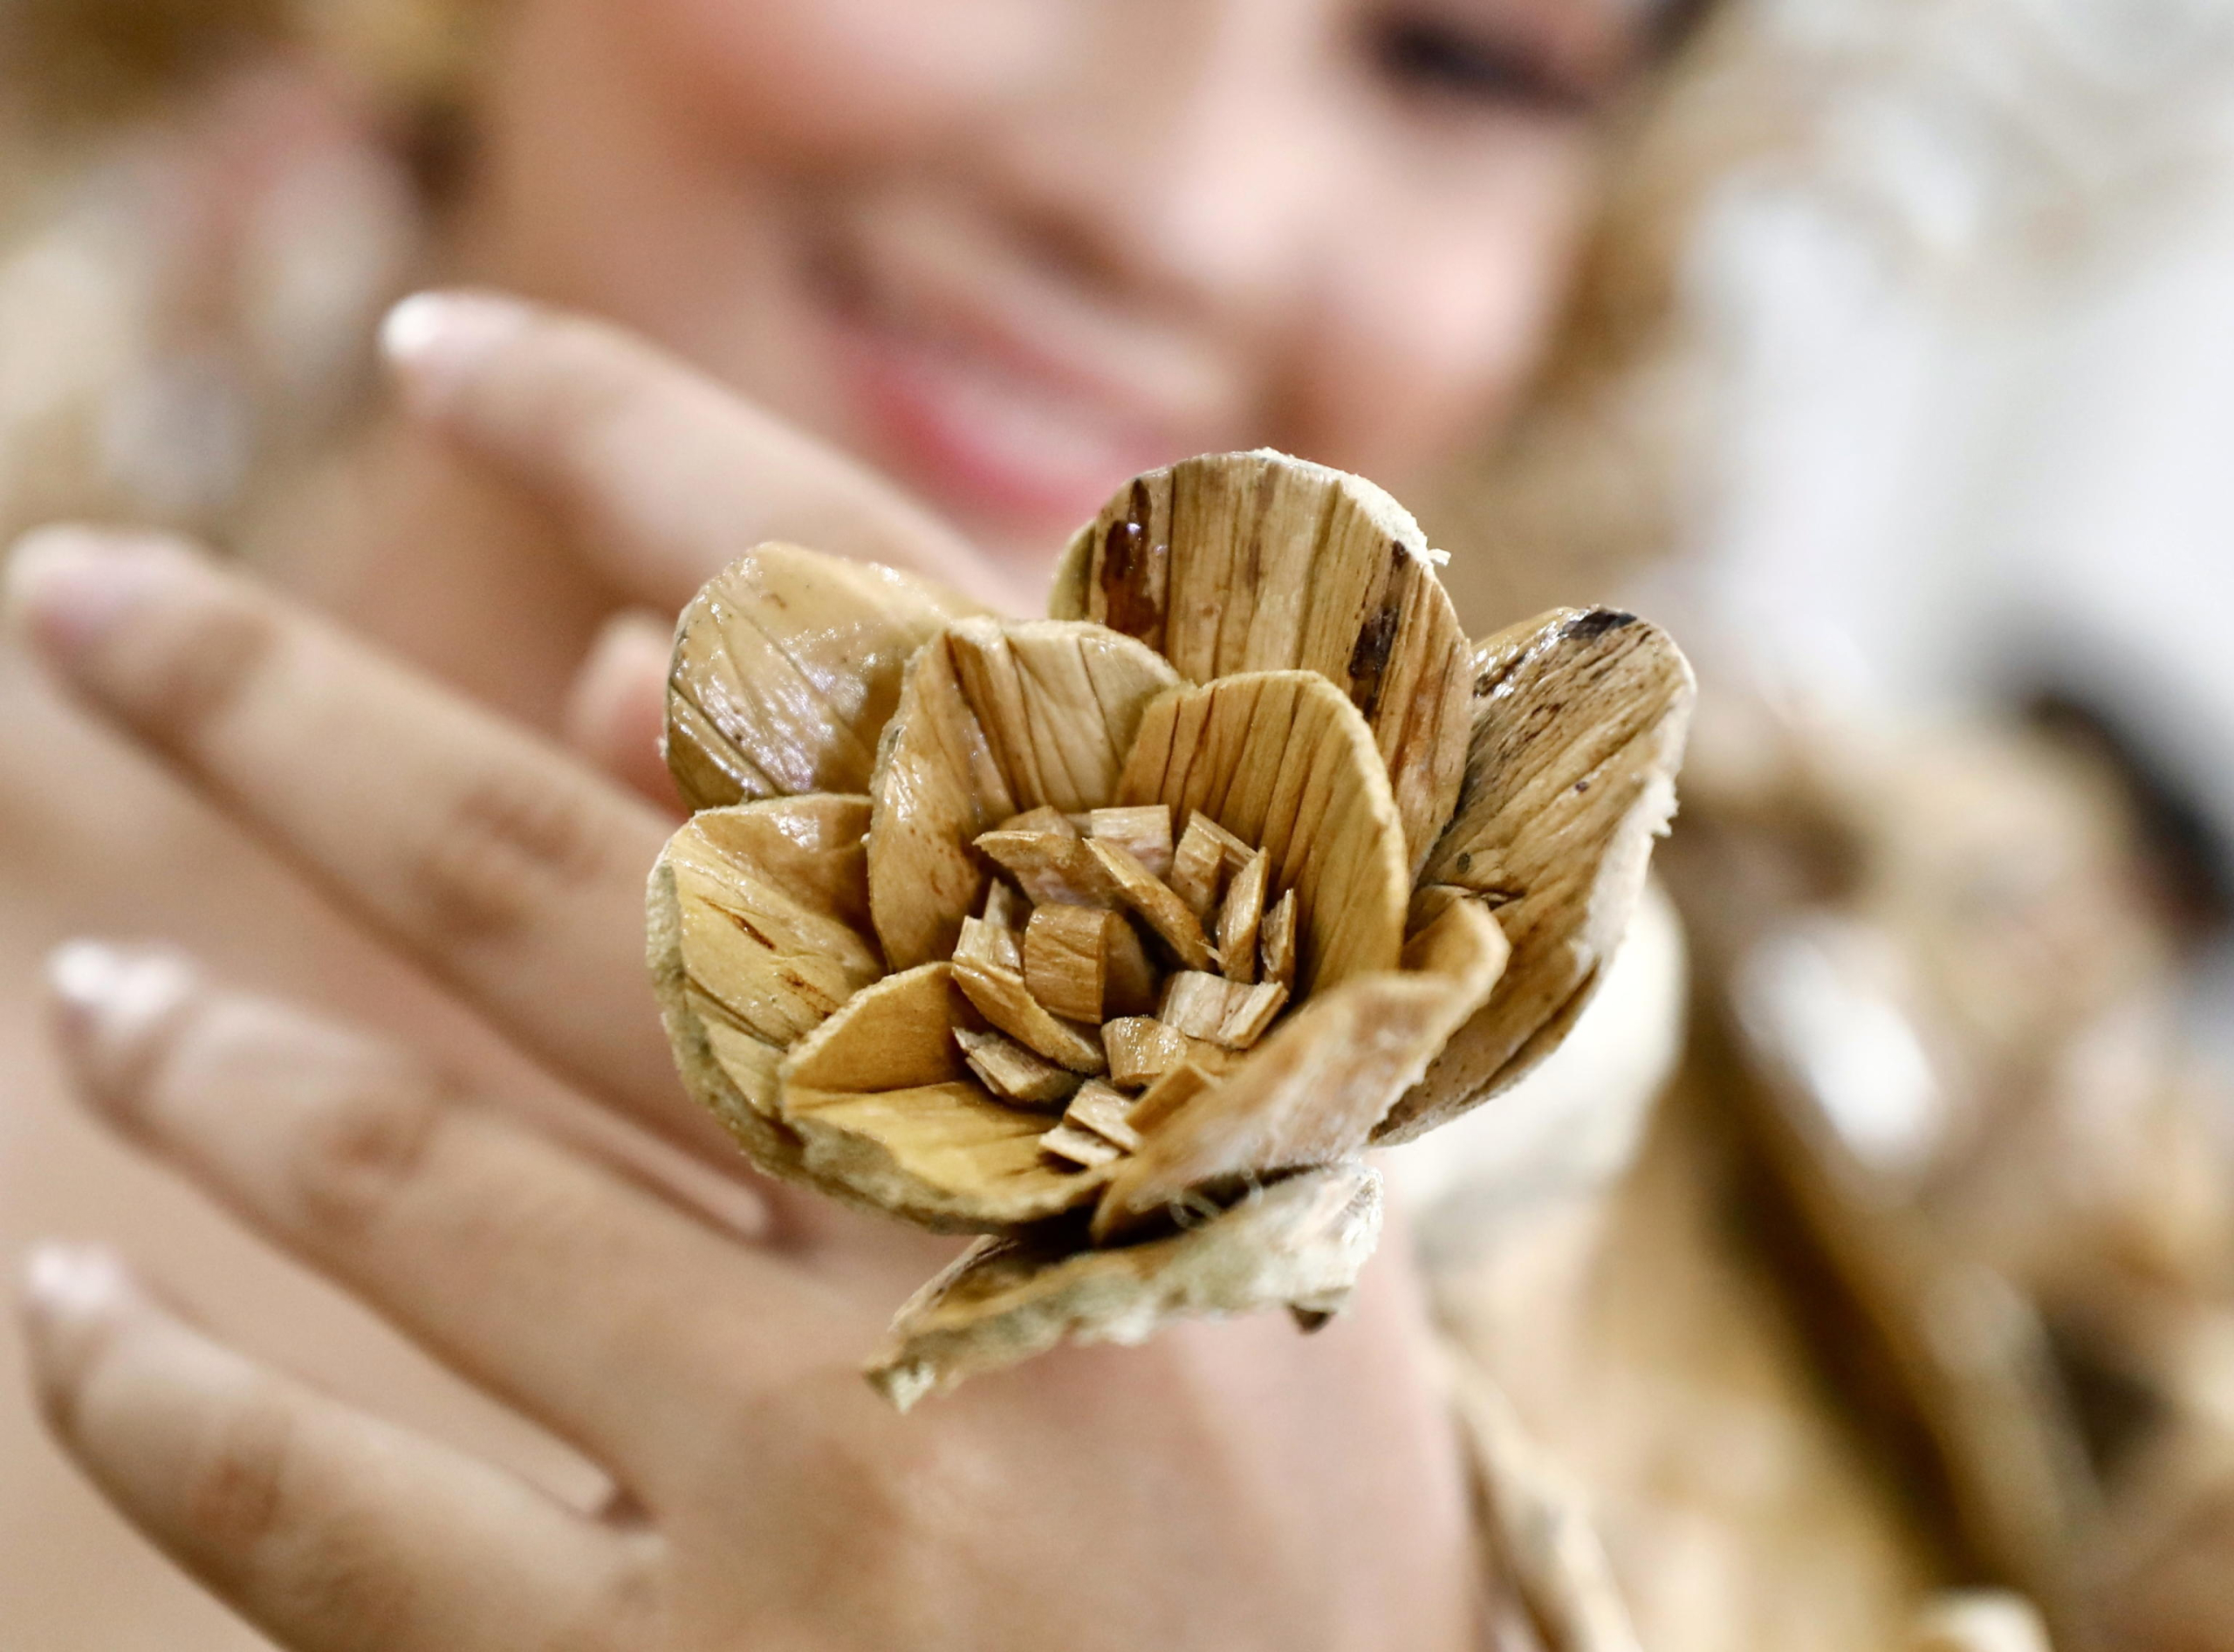 epa11529272 A Filipino woman wearing a ring, made from dried water hyacinth stalks, poses during the Water Lily Festival in Las Pinas city, Metro Manila, Philippines, 06 August 2024. The annual Water Lily Festival in Las Pinas city was declared by the Villar Foundation to highlight the transformation of water lilies from aquatic nuisances to valuable resources. Through the 'Water Lily Weaving Project', the foundation turns these plants into handicrafts, creating livelihoods and aiding community rehabilitation. During the festival, villagers parade in traditional costumes made from dried water lilies, showcasing the project's success and promoting the benefits of water lily-based livelihoods for local residents.  EPA/FRANCIS R. MALASIG